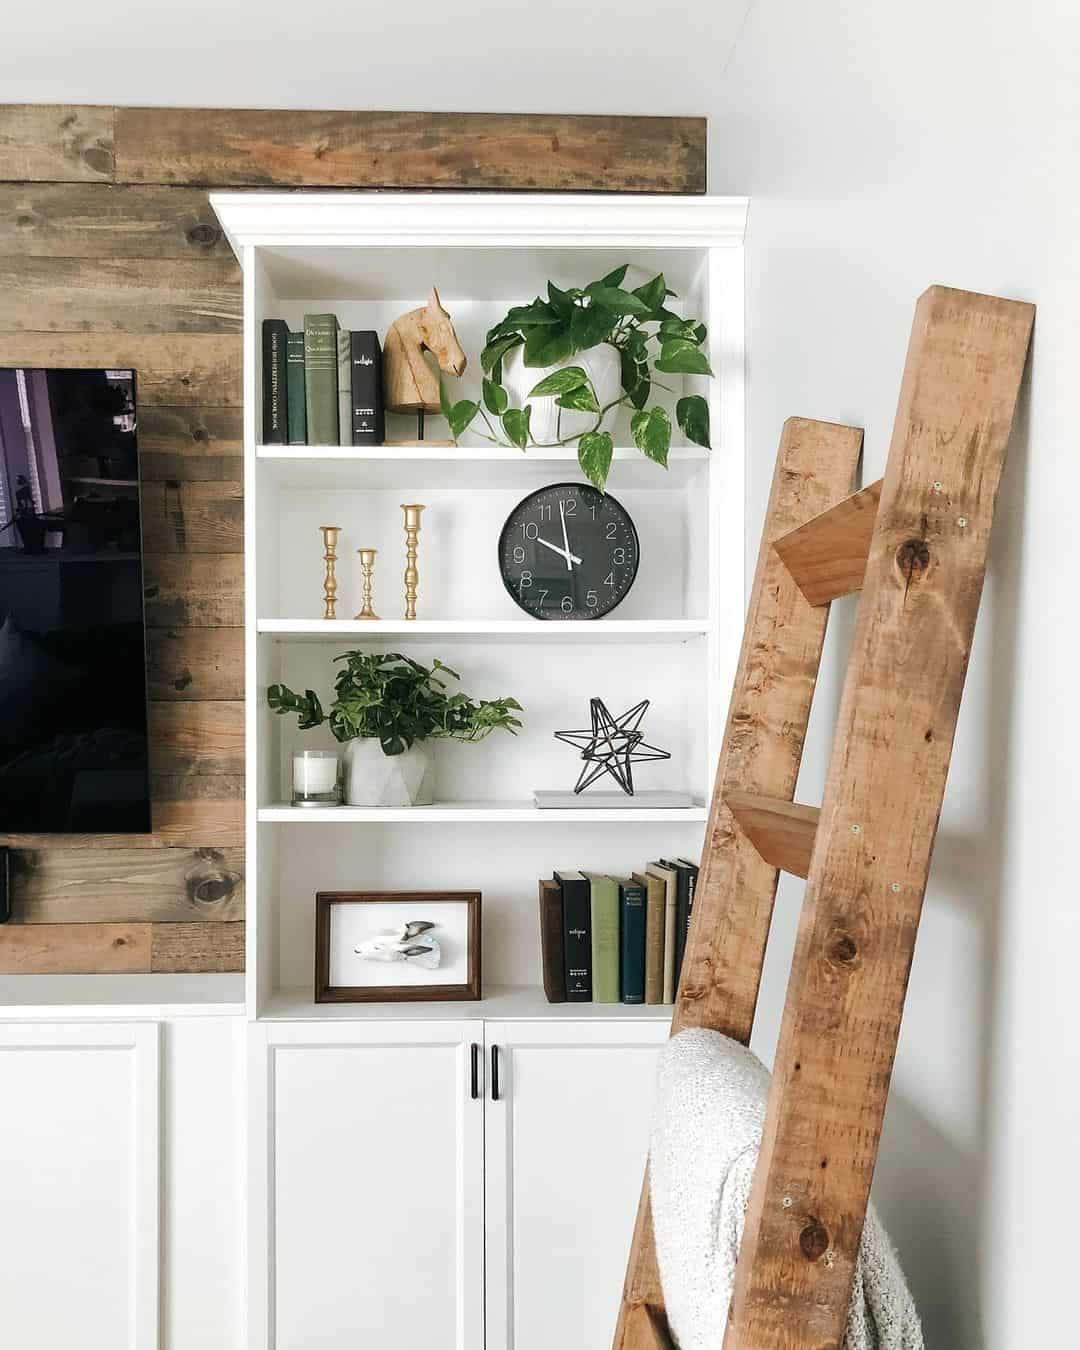 Utilizing Reclaimed Wood for Wall Design Behind Built-in Shelves